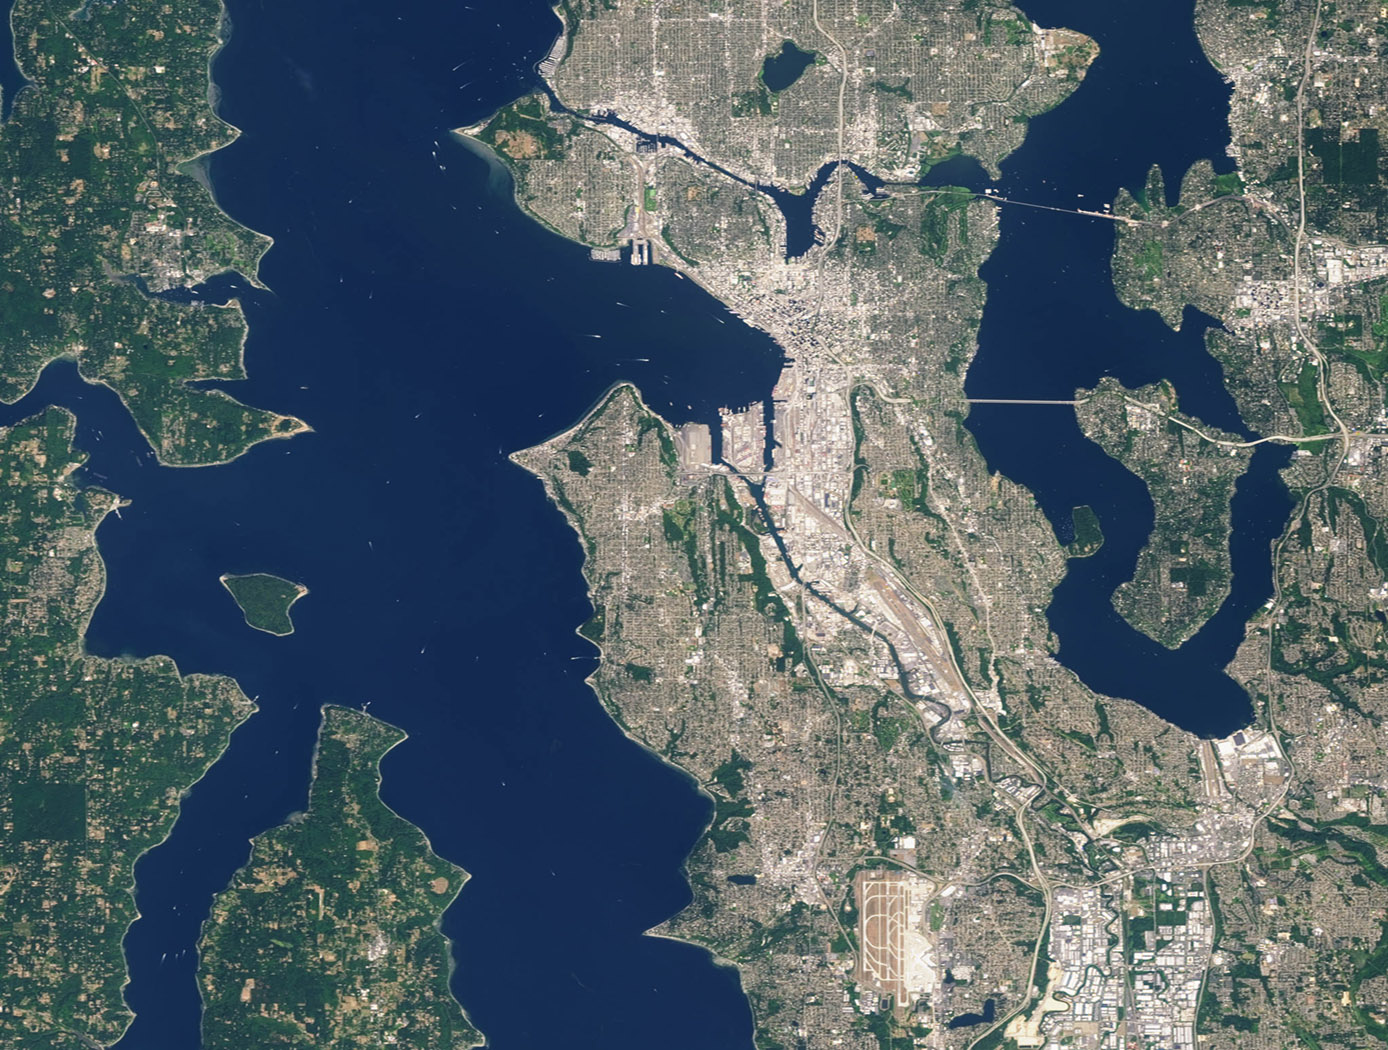 Landsat 7 image of Seattle, Washington acquired August 23, 2014. Landsat 7 is a U.S. satellite used to acquire remotely sensed images of the Earth's land surface and surrounding coastal regions. It is maintained by the Landsat 7 Project Science Office at the NASA Goddard Space Flight Center in Greenbelt, MD. Landsat satellites have been acquiring images of the Earths land surface since 1972. Currently there are more than 2 million Landsat images in the National Satellite Land Remote Sensing Data Archive.